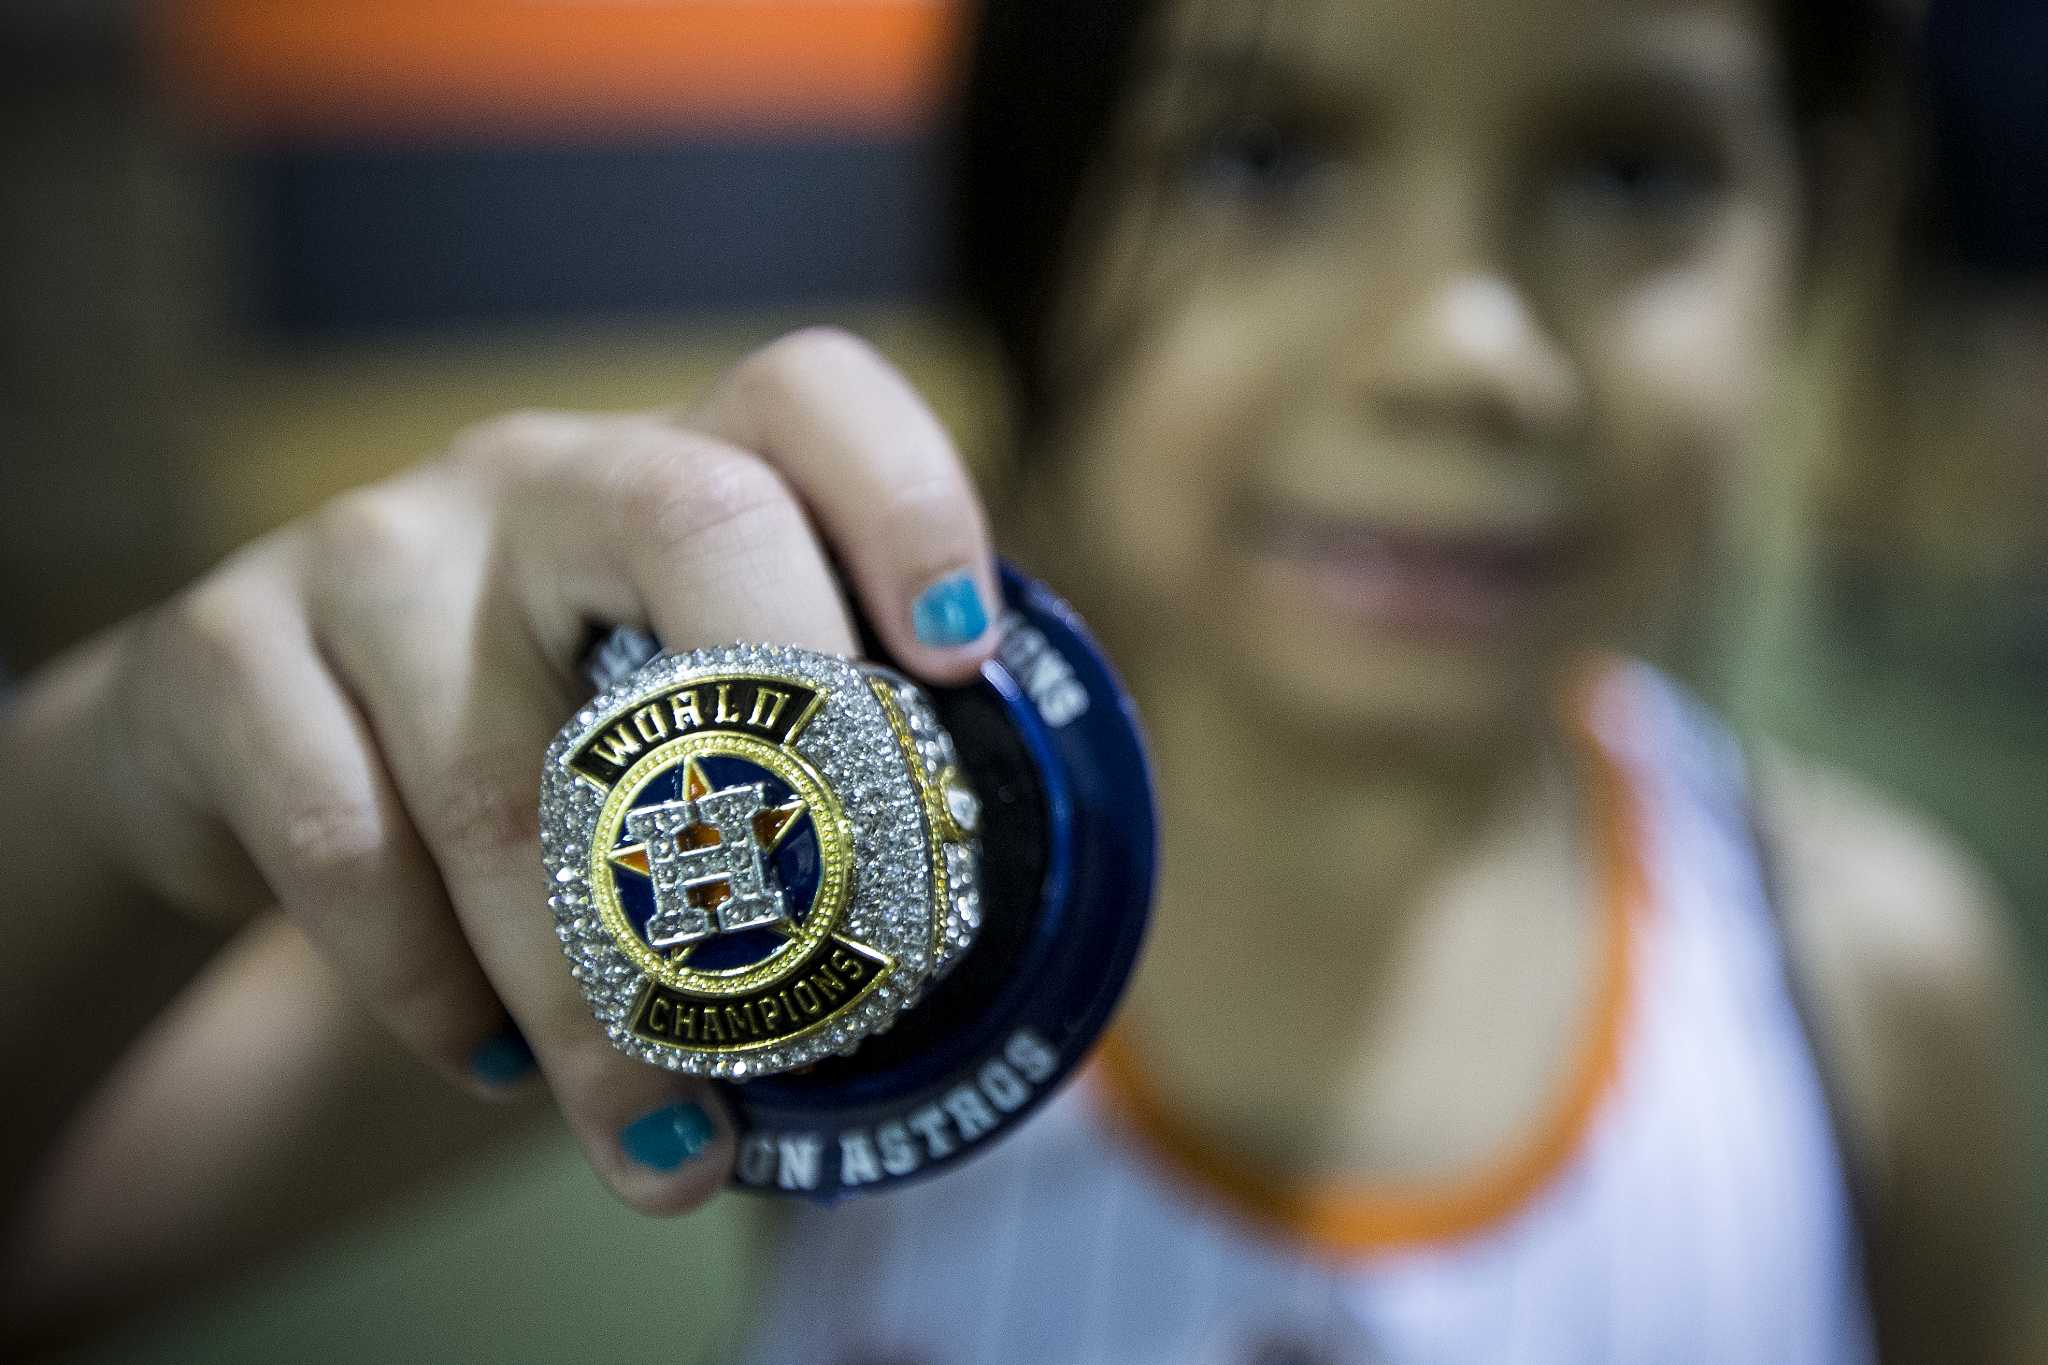 Want a 2022 Astros World Championship ring? Here's your chance